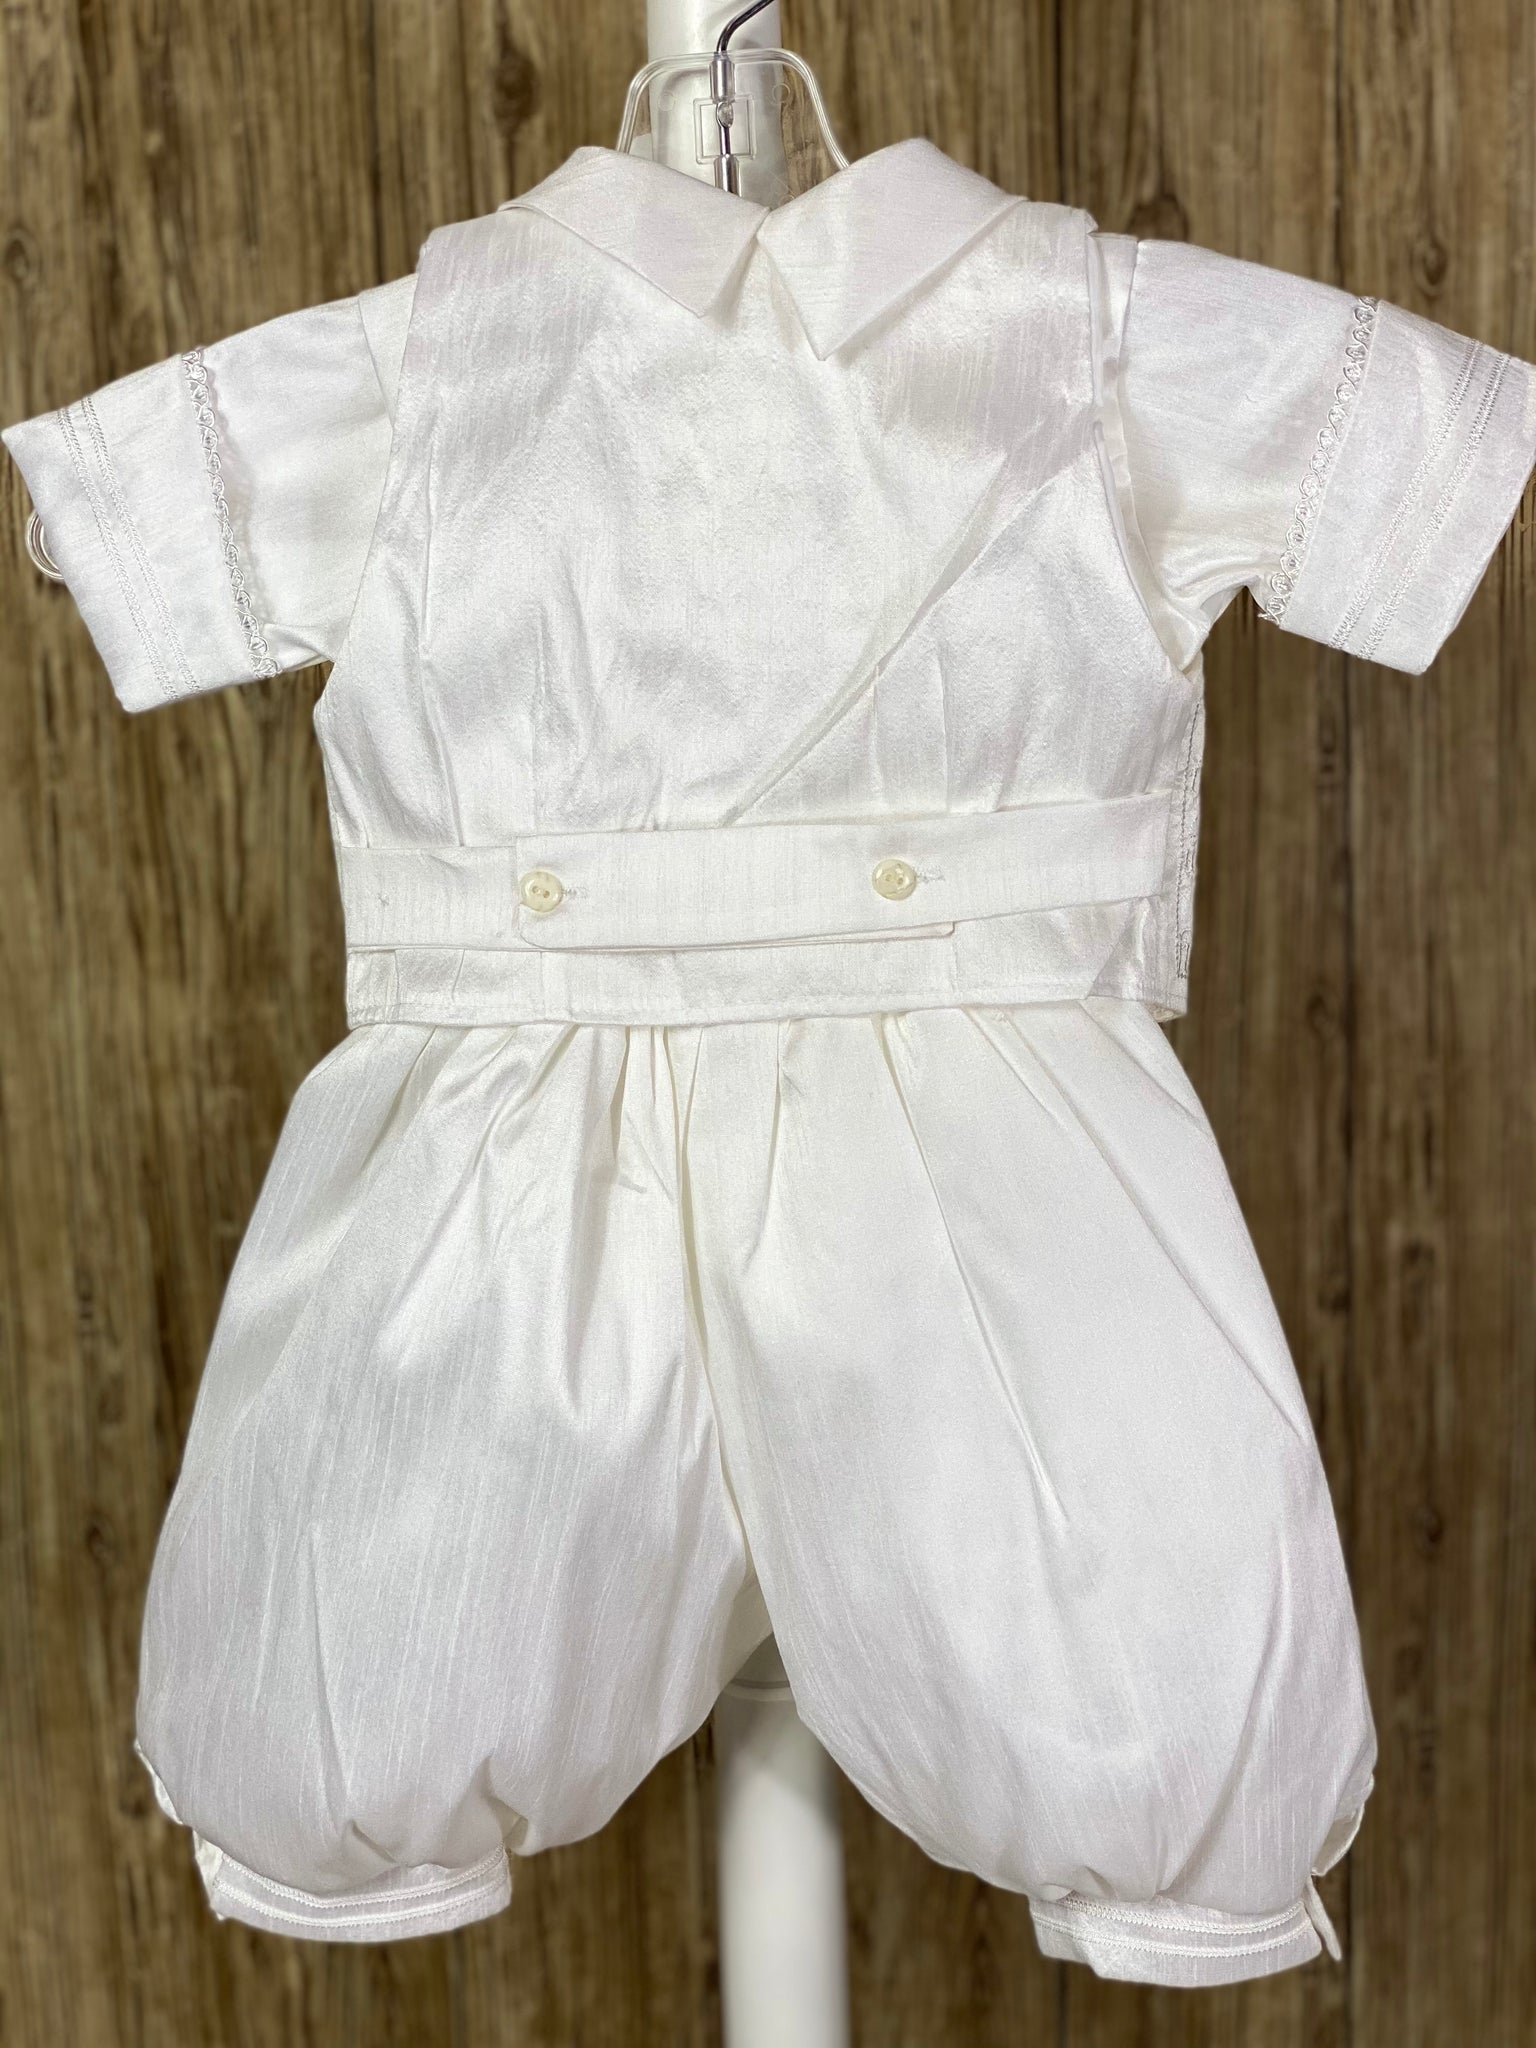 This a beautiful, one-of-a-kind boy’s baptism gown/set.  Lovely clothes for a precious child.   WHITE   4-piece white set including beret, vest, shirt, suspender pants JHS symbol embroidered into vest (JHS stands for Jesus Holmium Salvatore, Latin for Jesus Savior of Mankind) Tassel pin with 3 rhinestone centered circles Thin trim along cuffs, beret, and up pant legs Collared shirt with short sleeves Buttoning on pant cuffs Elastic banding behind pants Button closure on back of shirt